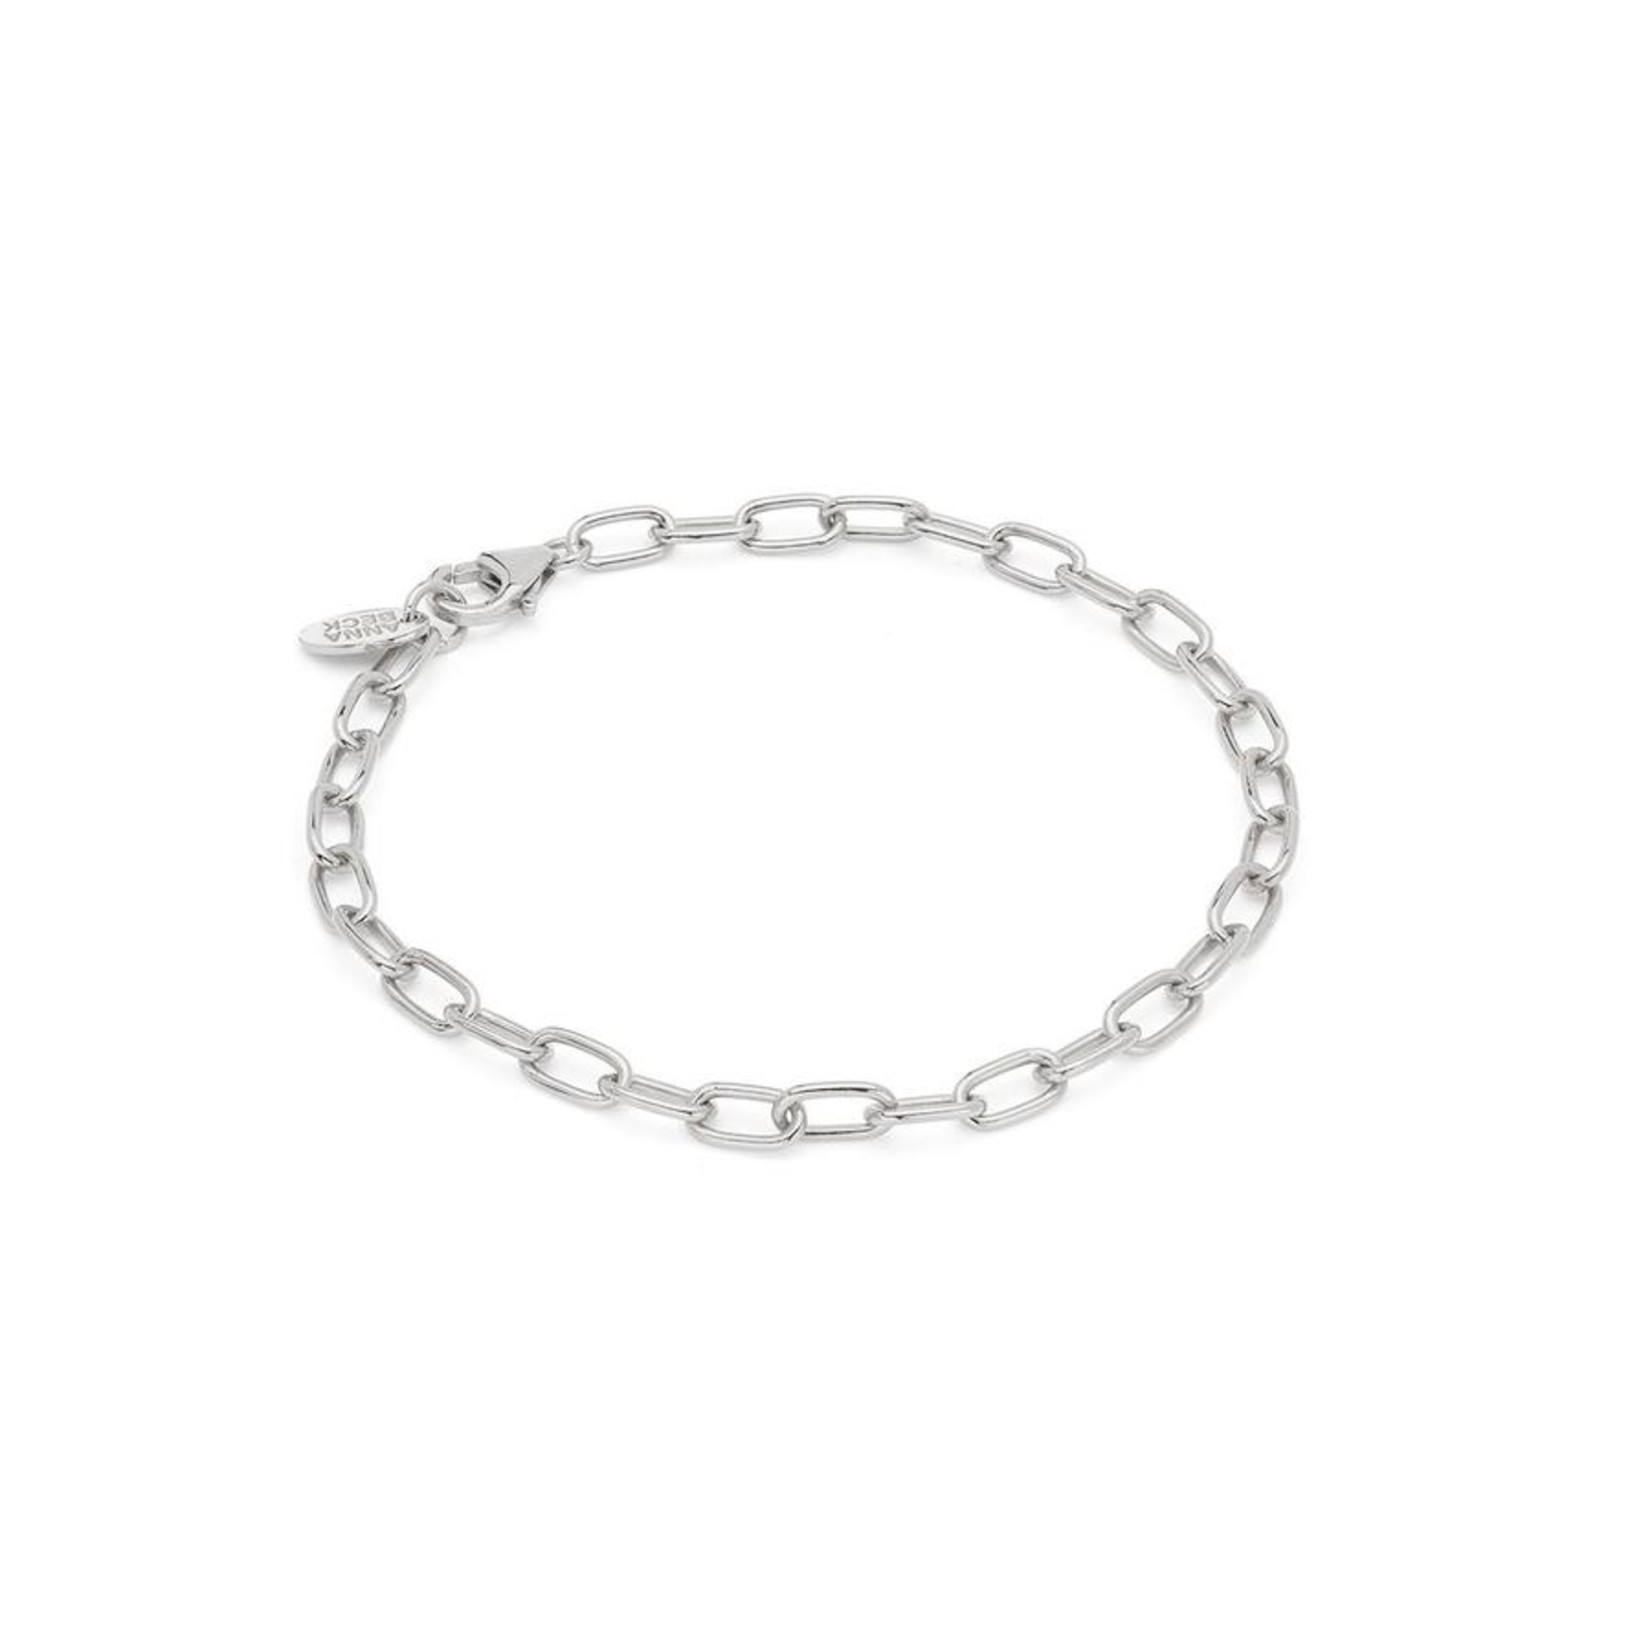 Elongated Oval Chain Bracelet - 7.5in - sterling silver or 18k gold plate